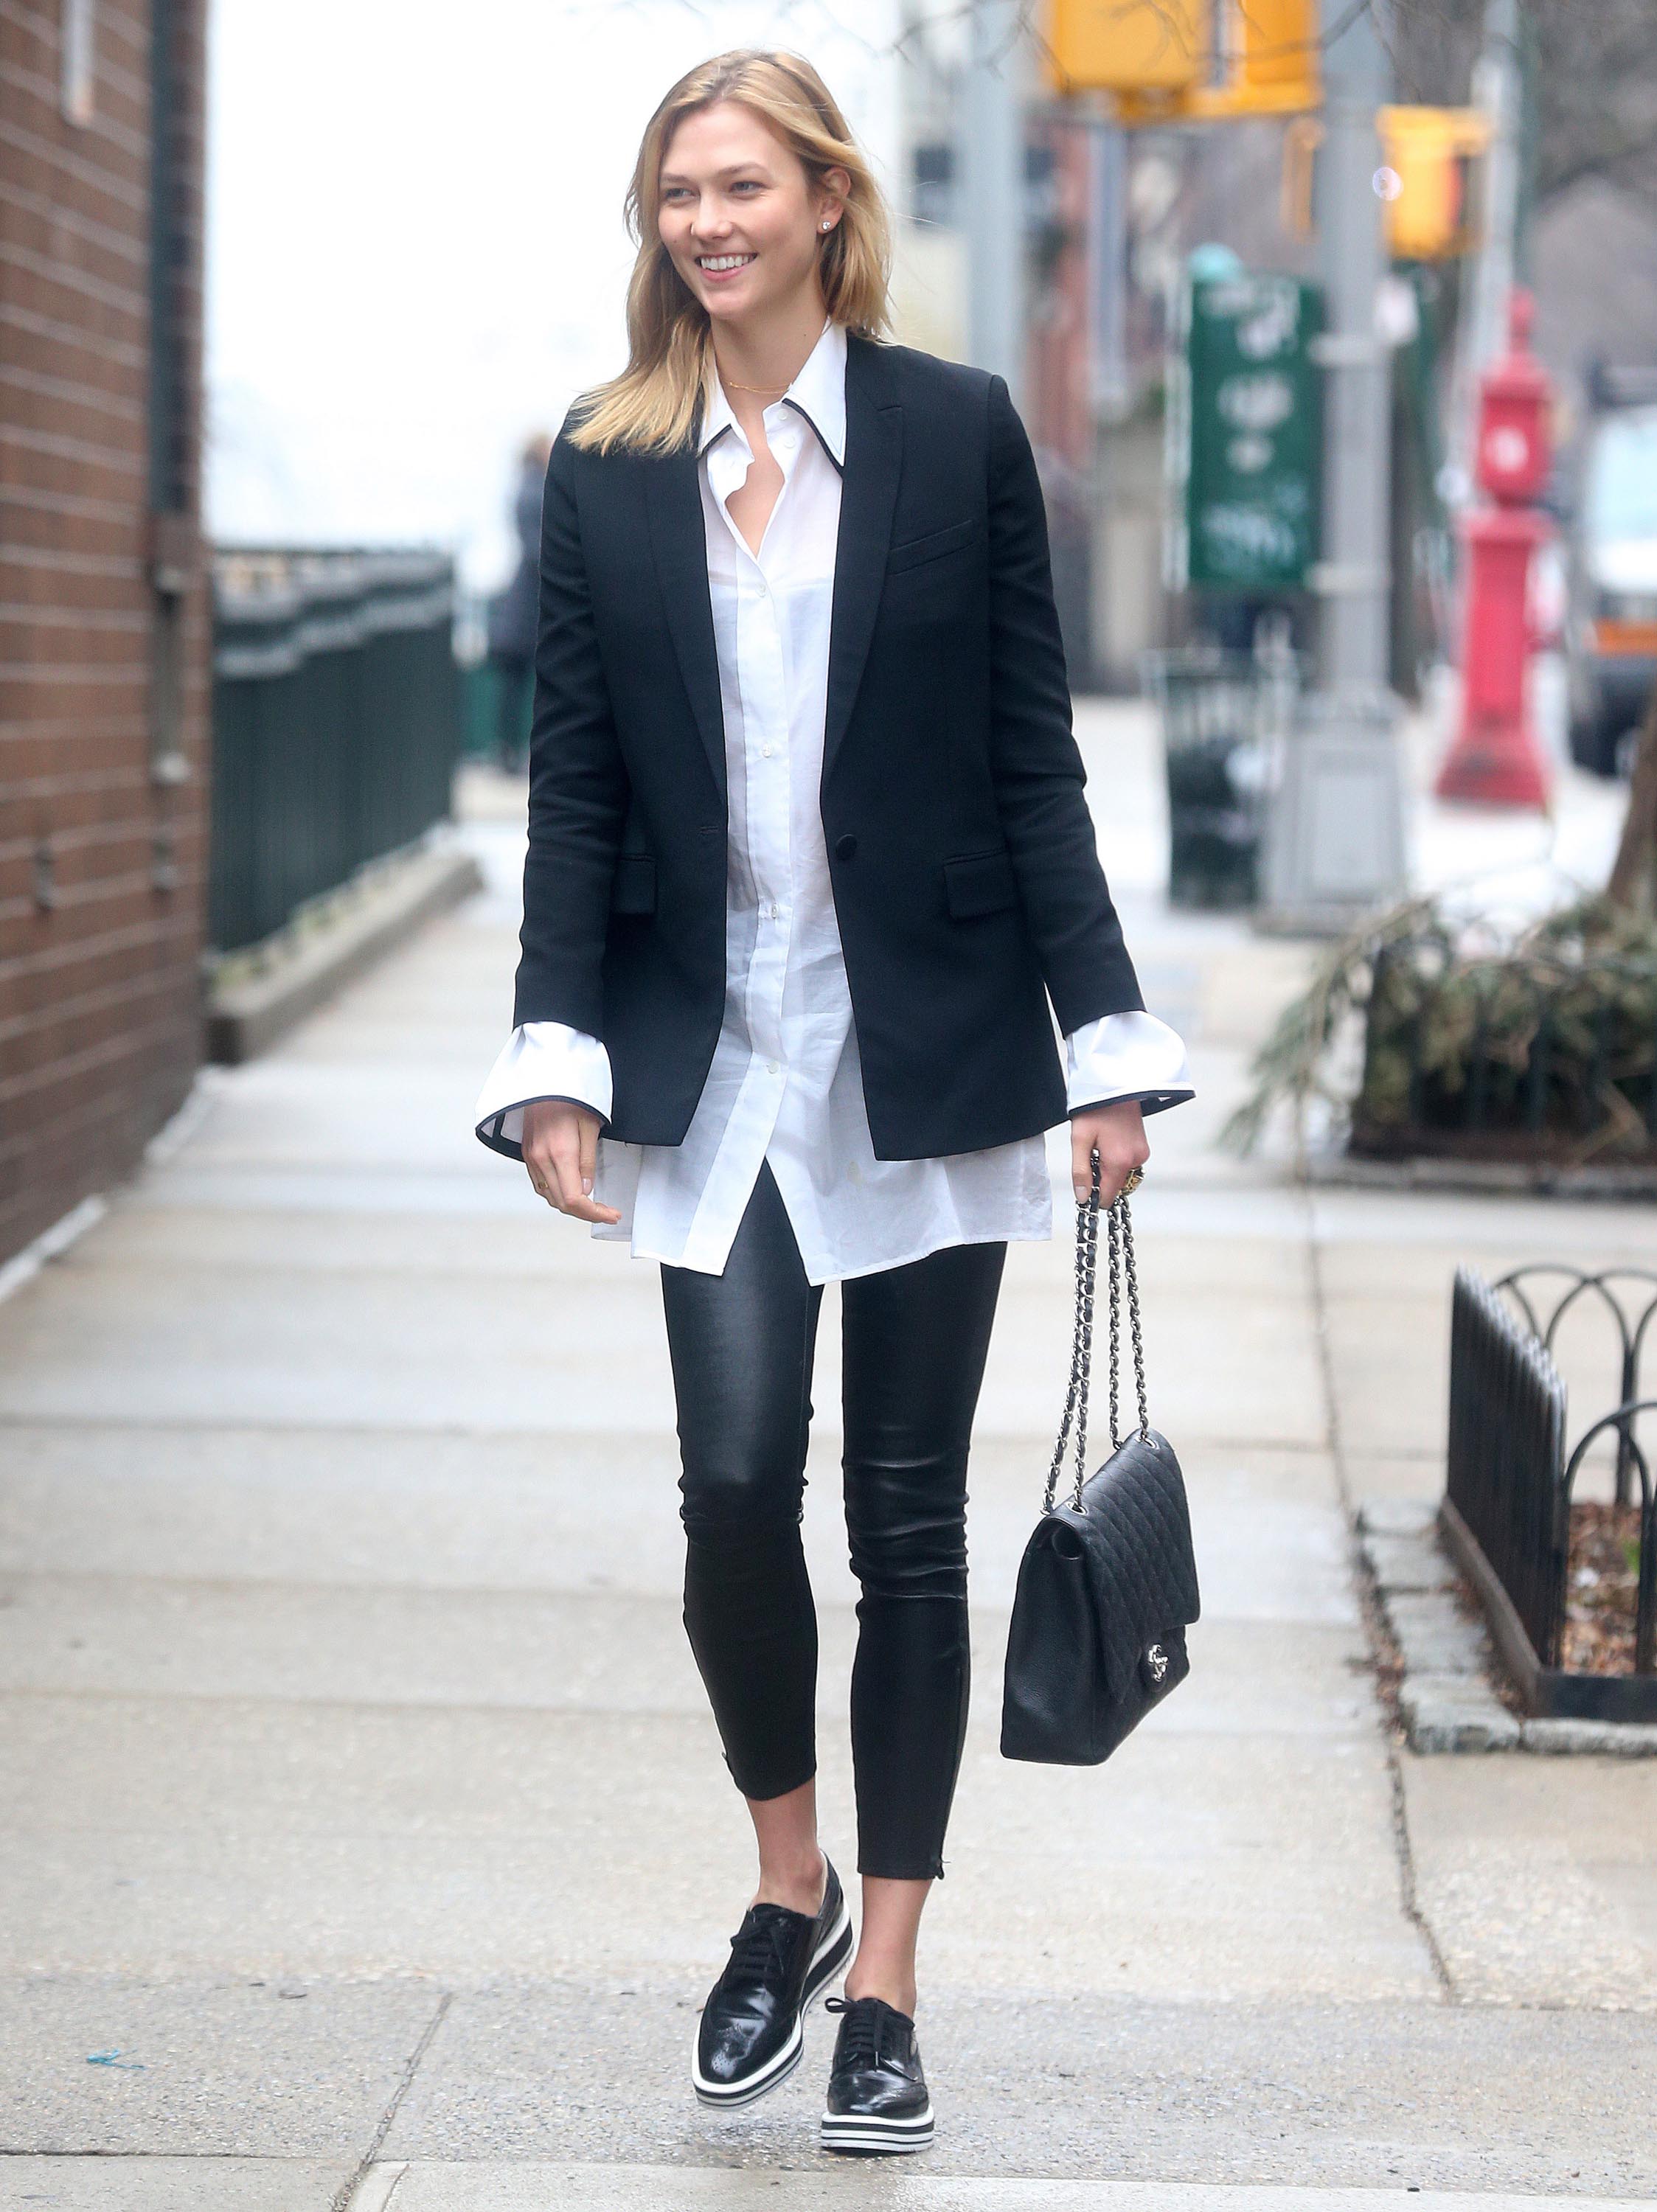 Karlie Kloss seen out and about in NYC